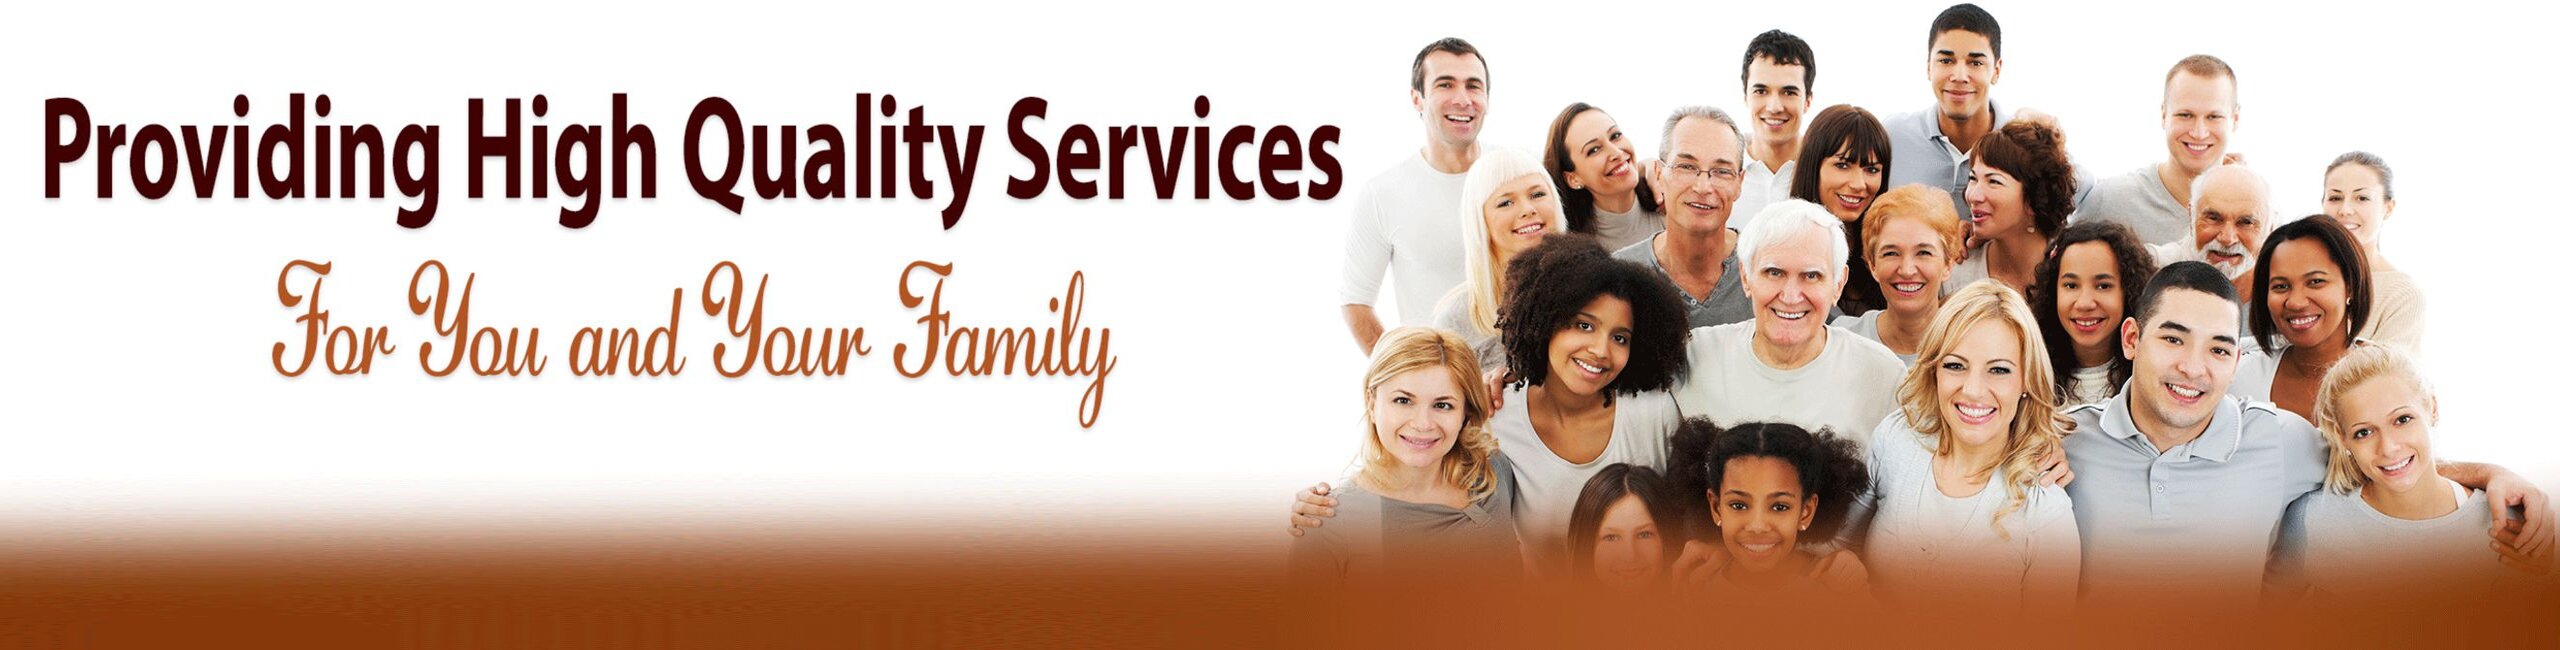 Providing High Quality Services
For You and Your Family